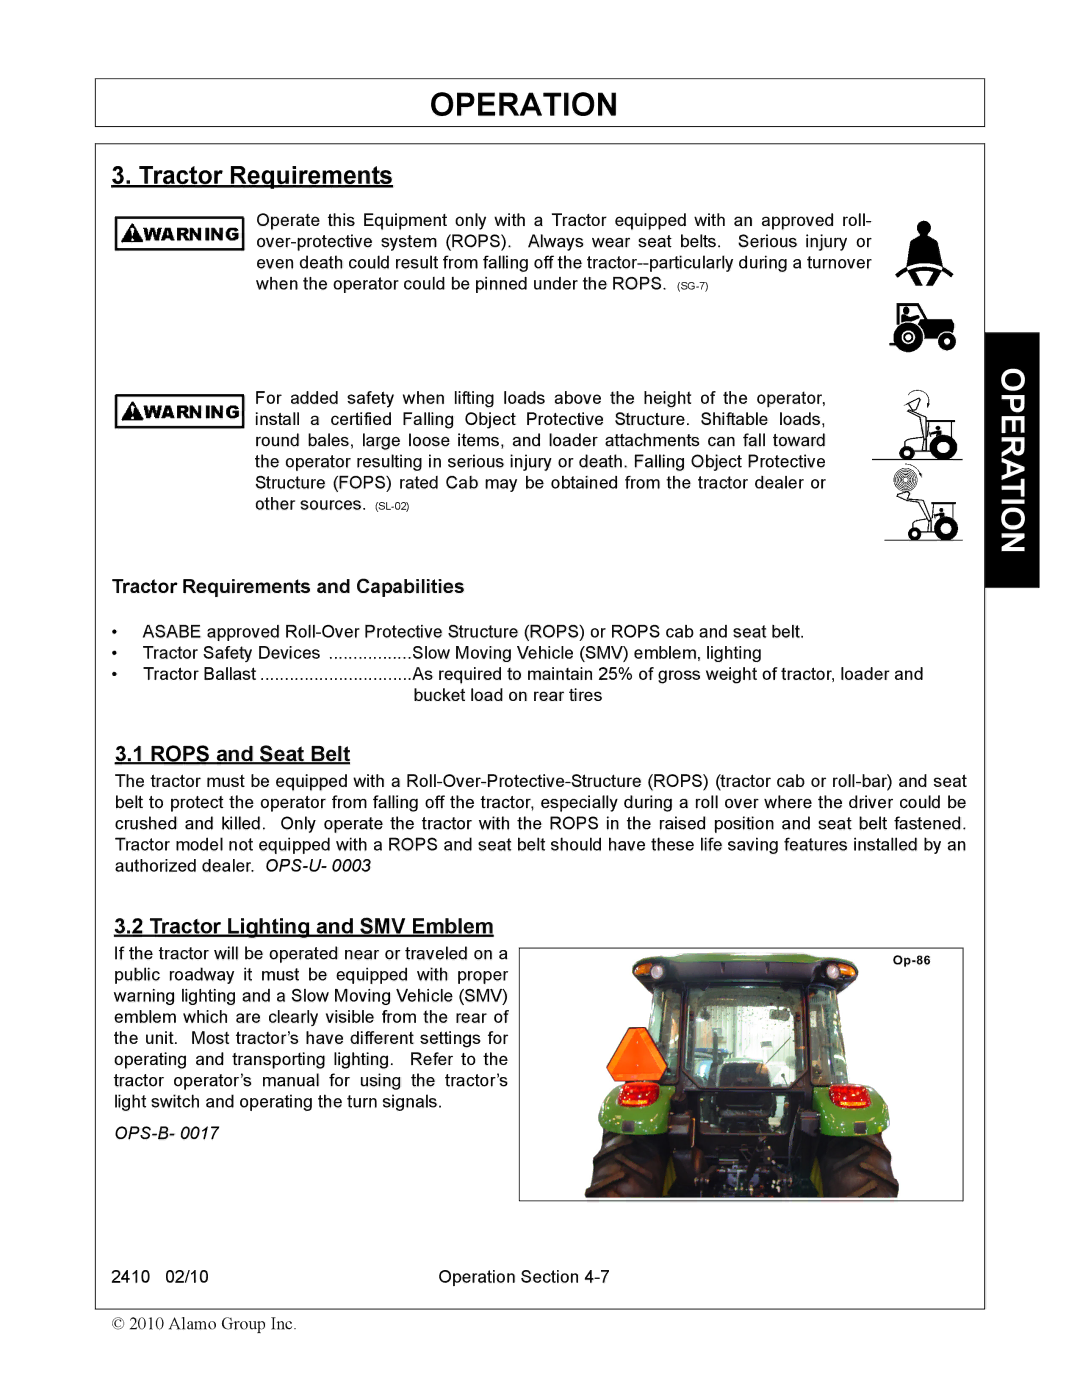 Servis-Rhino 2410 manual Tractor Requirements, Rops and Seat Belt, Tractor Lighting and SMV Emblem 